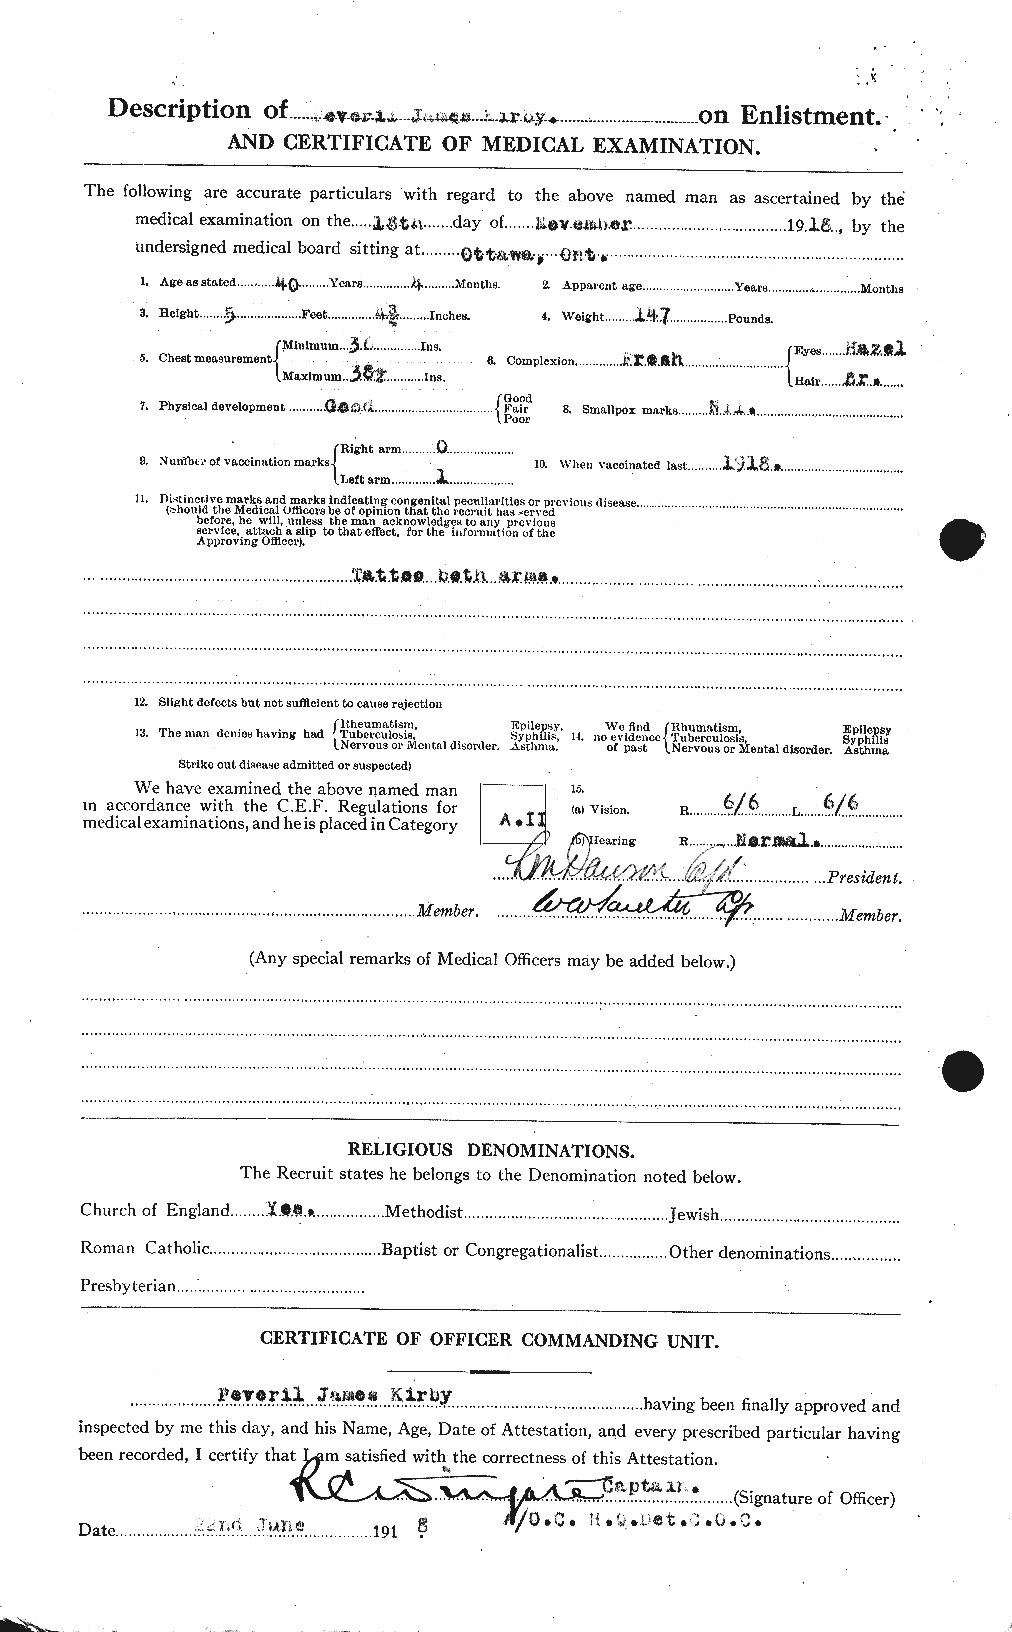 Personnel Records of the First World War - CEF 437261b